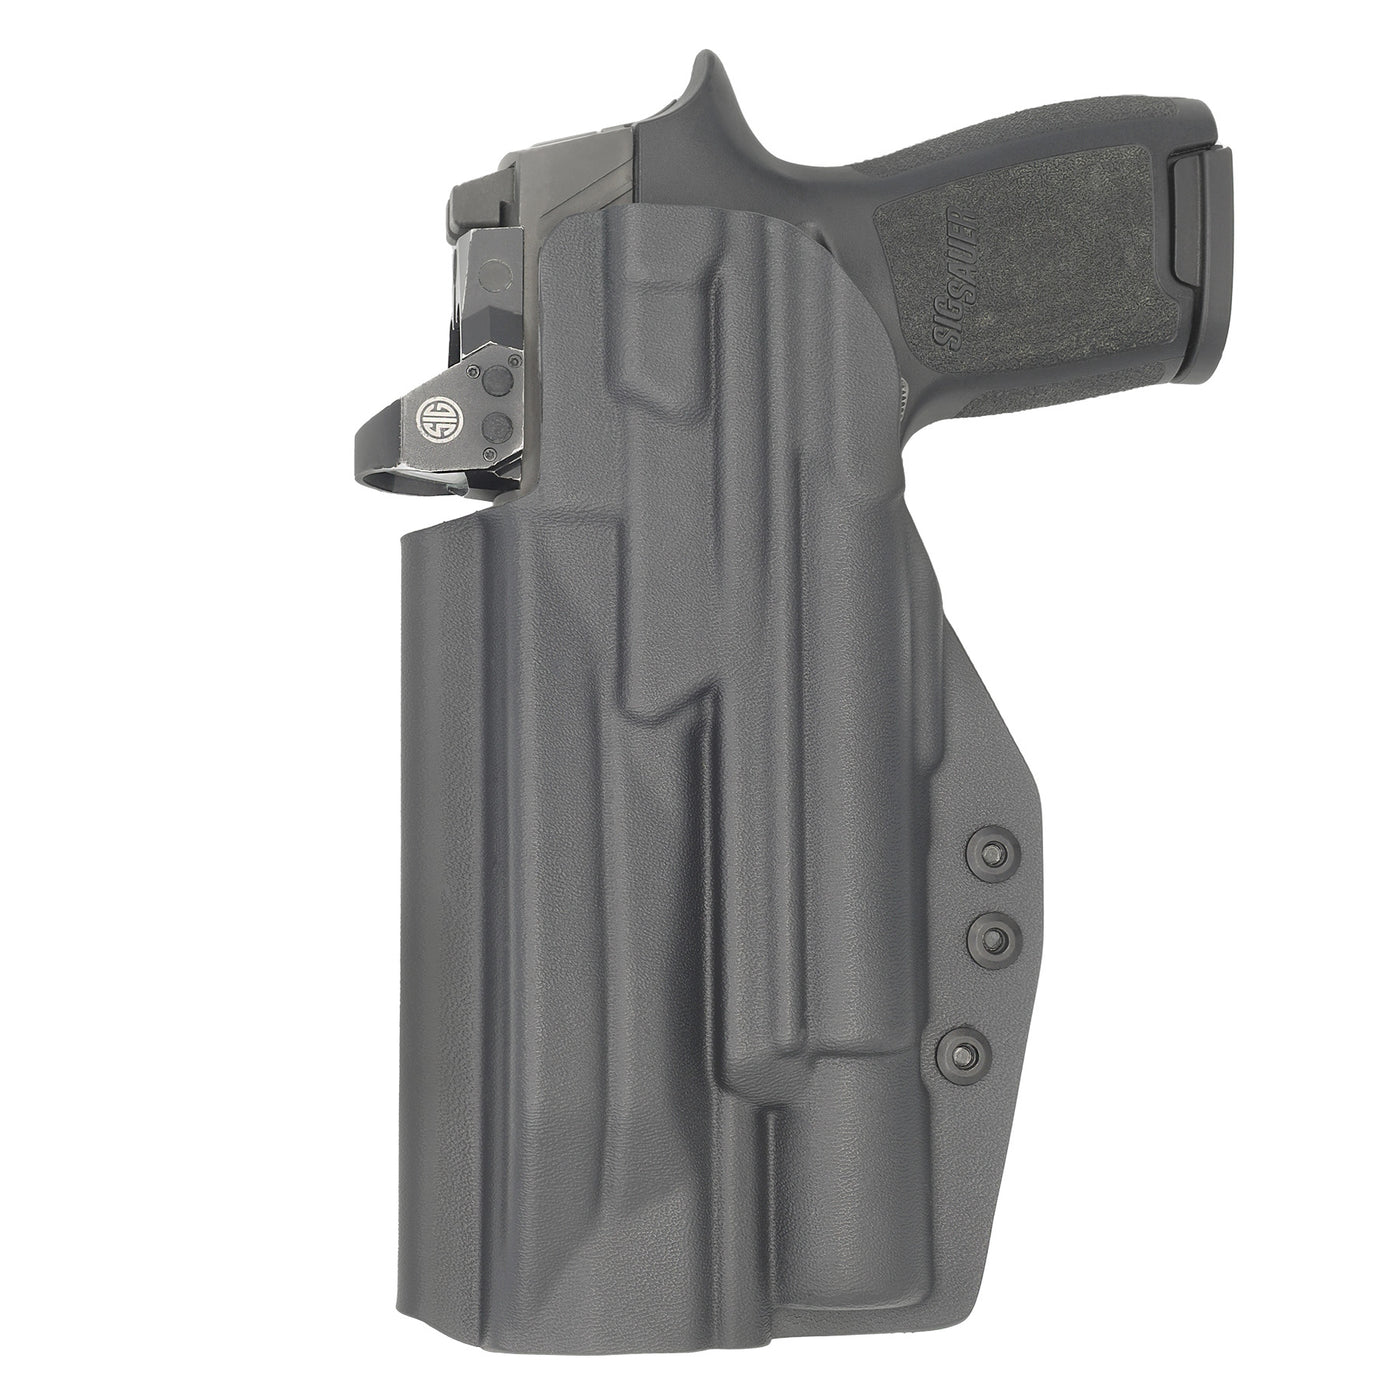 C&G Holsters quickship IWB Tactical XDM Elite Surefire X300 in holstered position back view